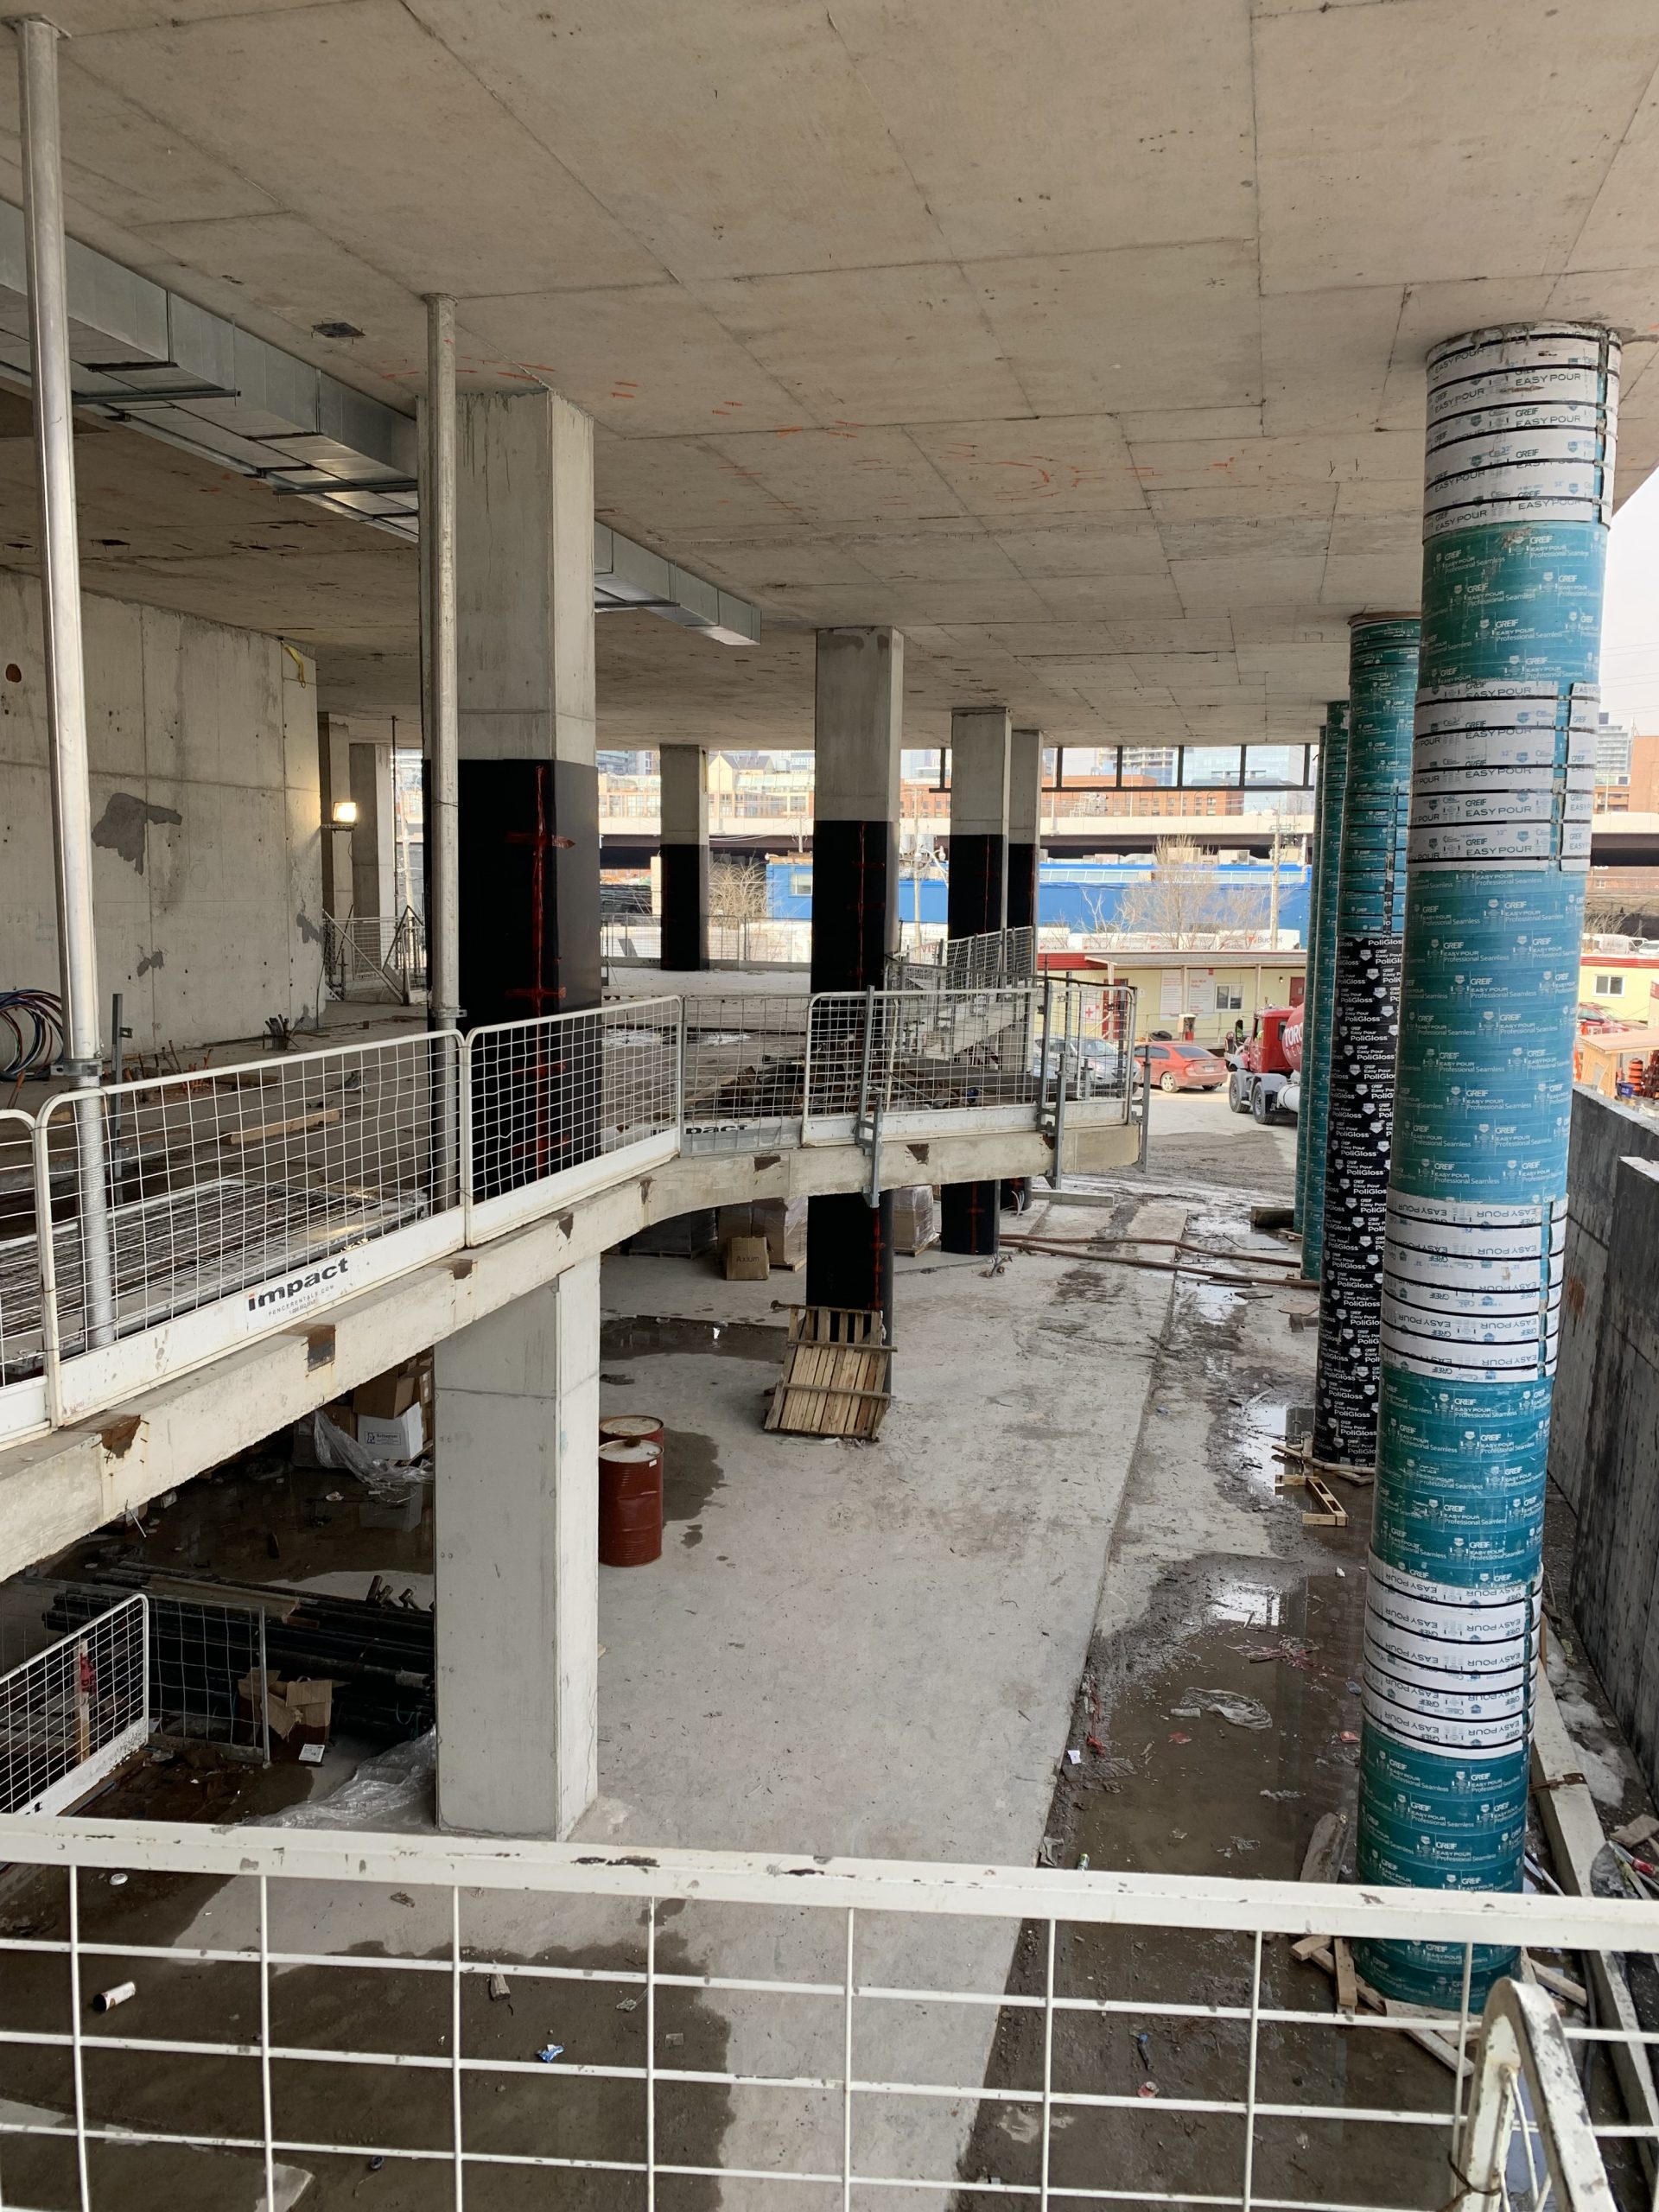 Photograph of the construction for the new East Bayfront Community Recreation Centre, showing the construction of the second floor overlooking the lobby in concrete.